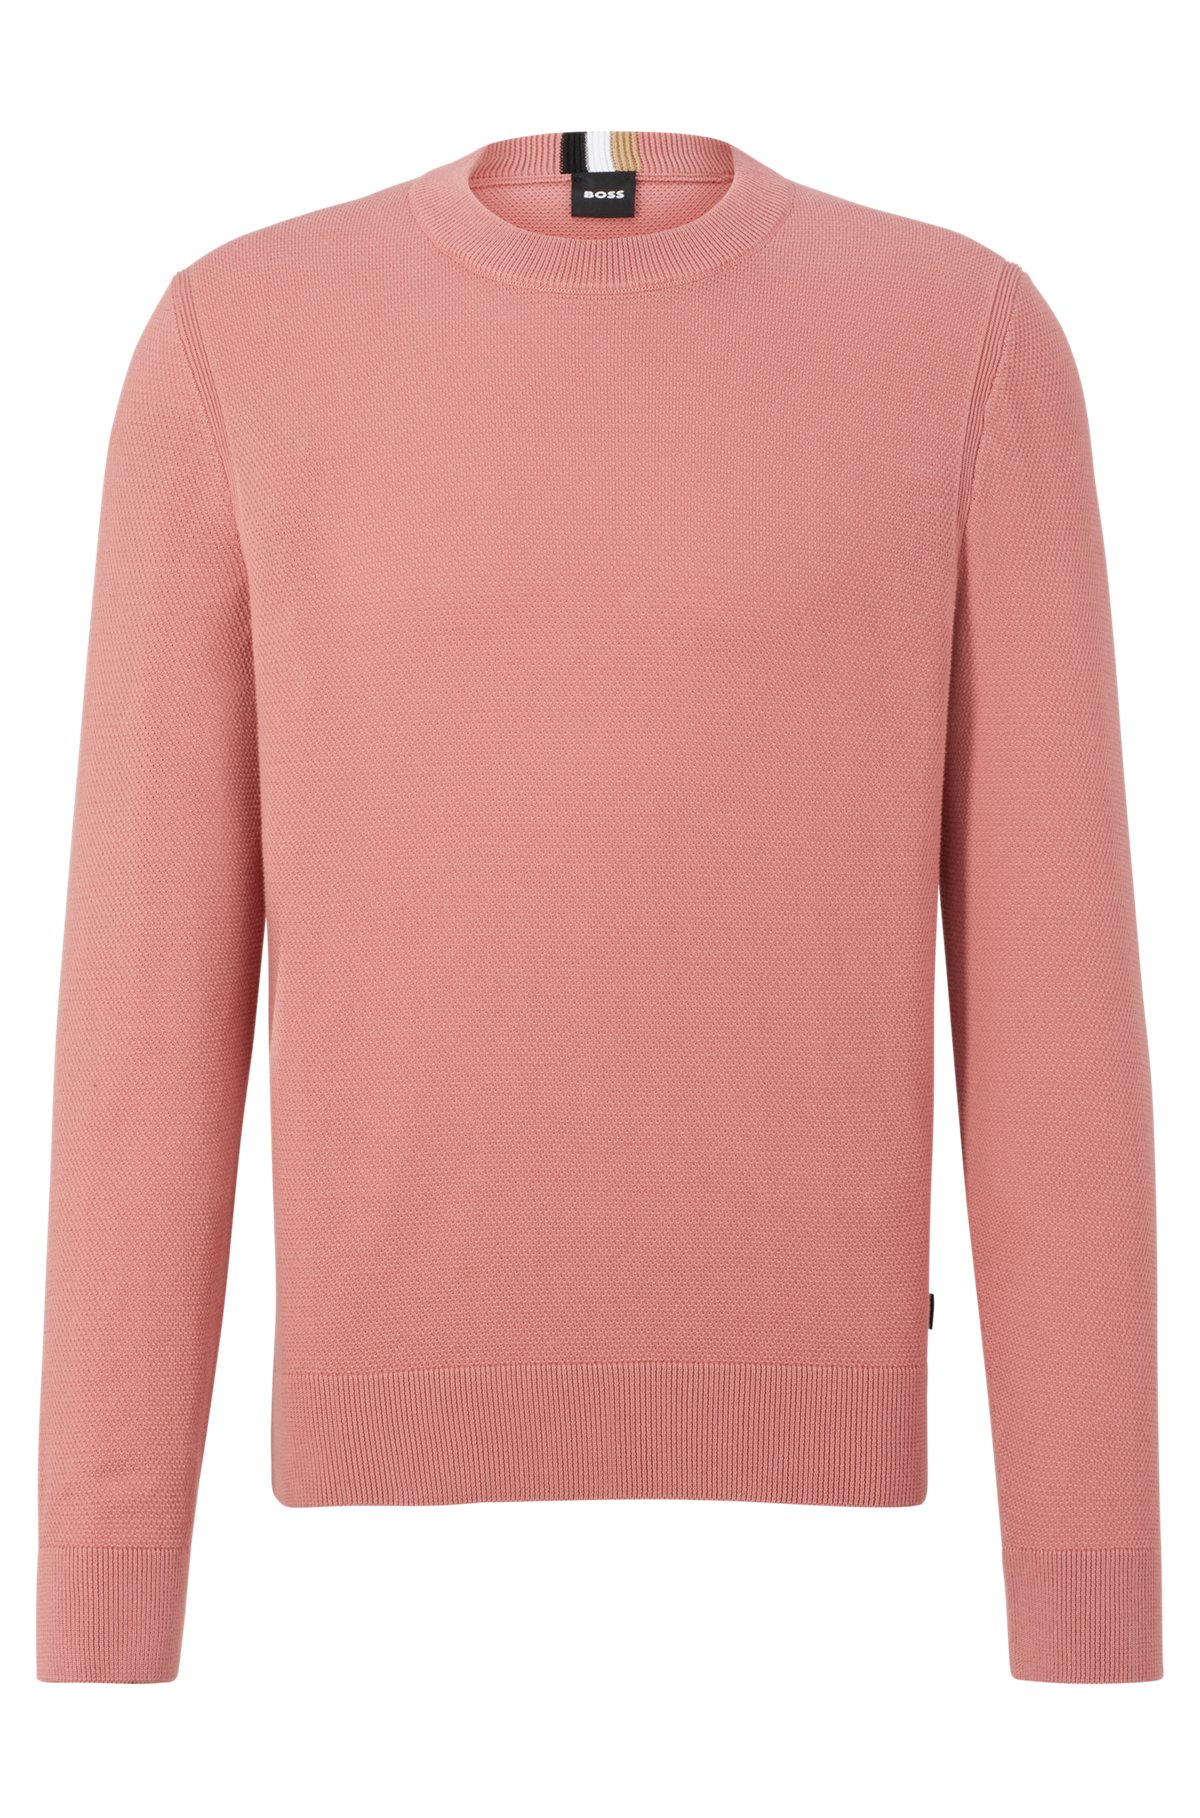 Crew-neck sweater in structured cotton with stripe details, light pink